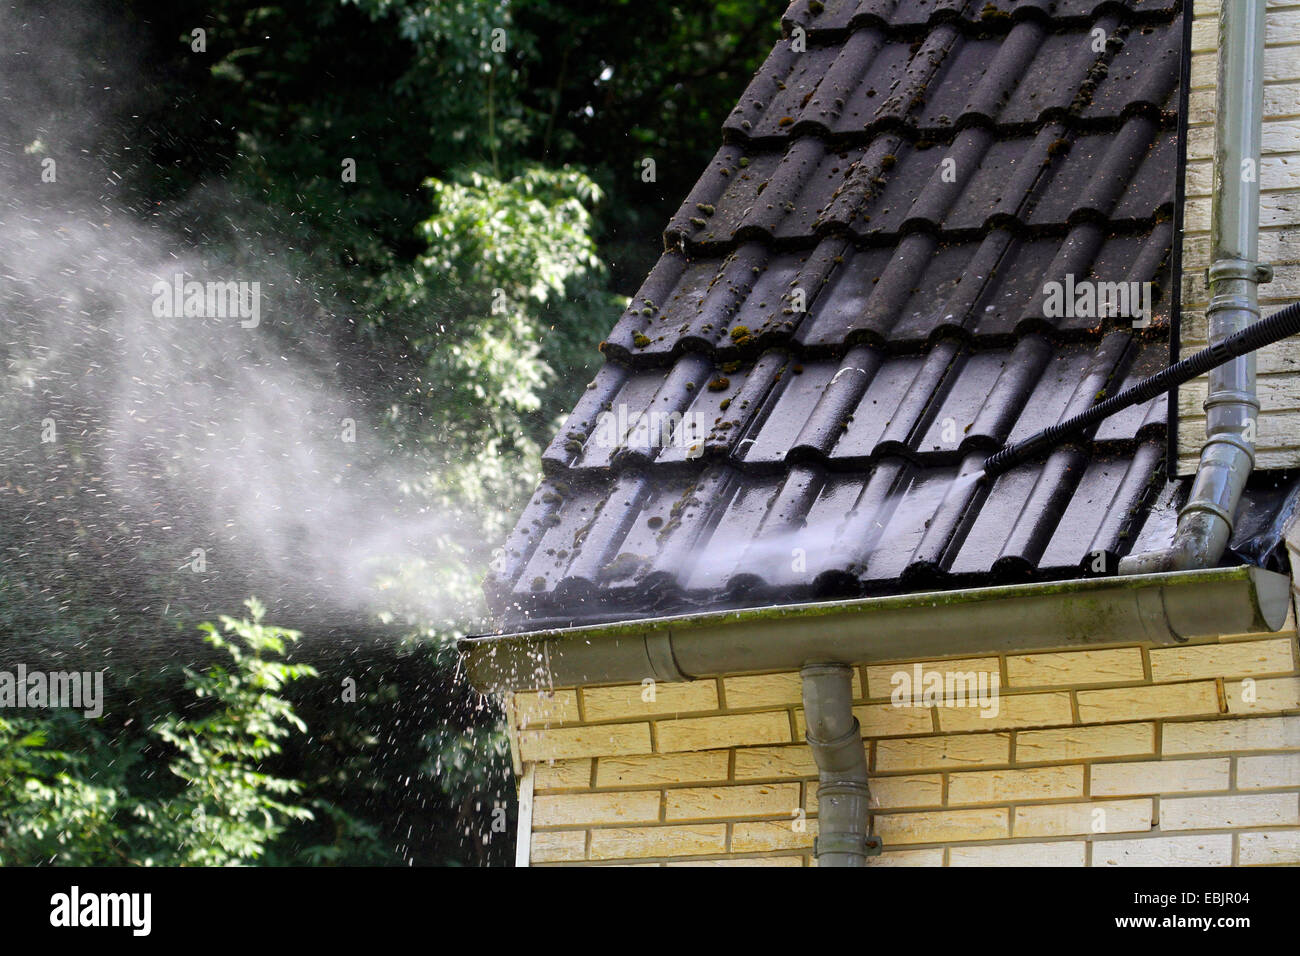 cleaning the roof and facade of a gabled house with a high-pressure water blaster, Germany, Nordrhein Westfalen, Ruhr Area, Essen Stock Photo